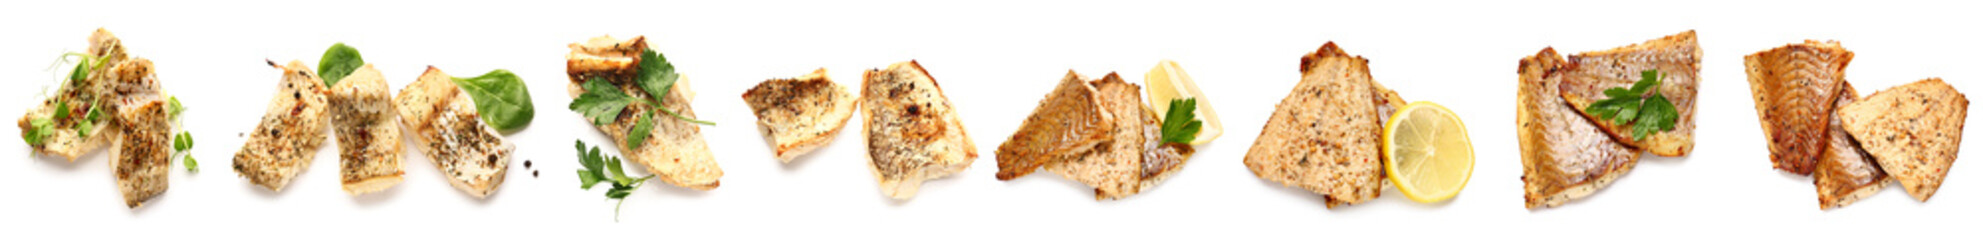 Set of tasty baked cod fish fillet with spices on white background, top view